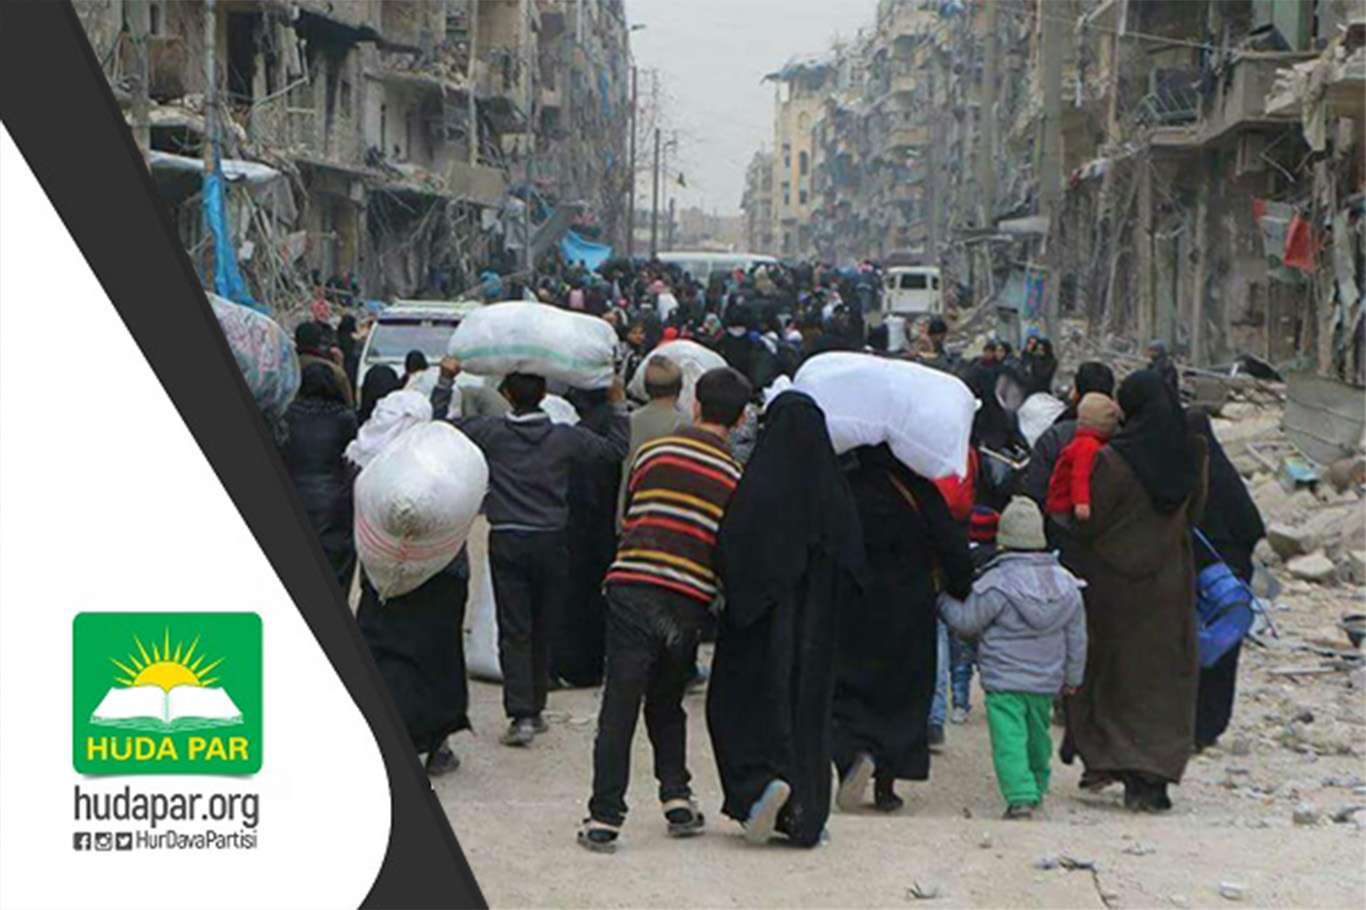 HÜDA PAR: Shame on the imperial powers that do not fulfill their responsibility in Syria!